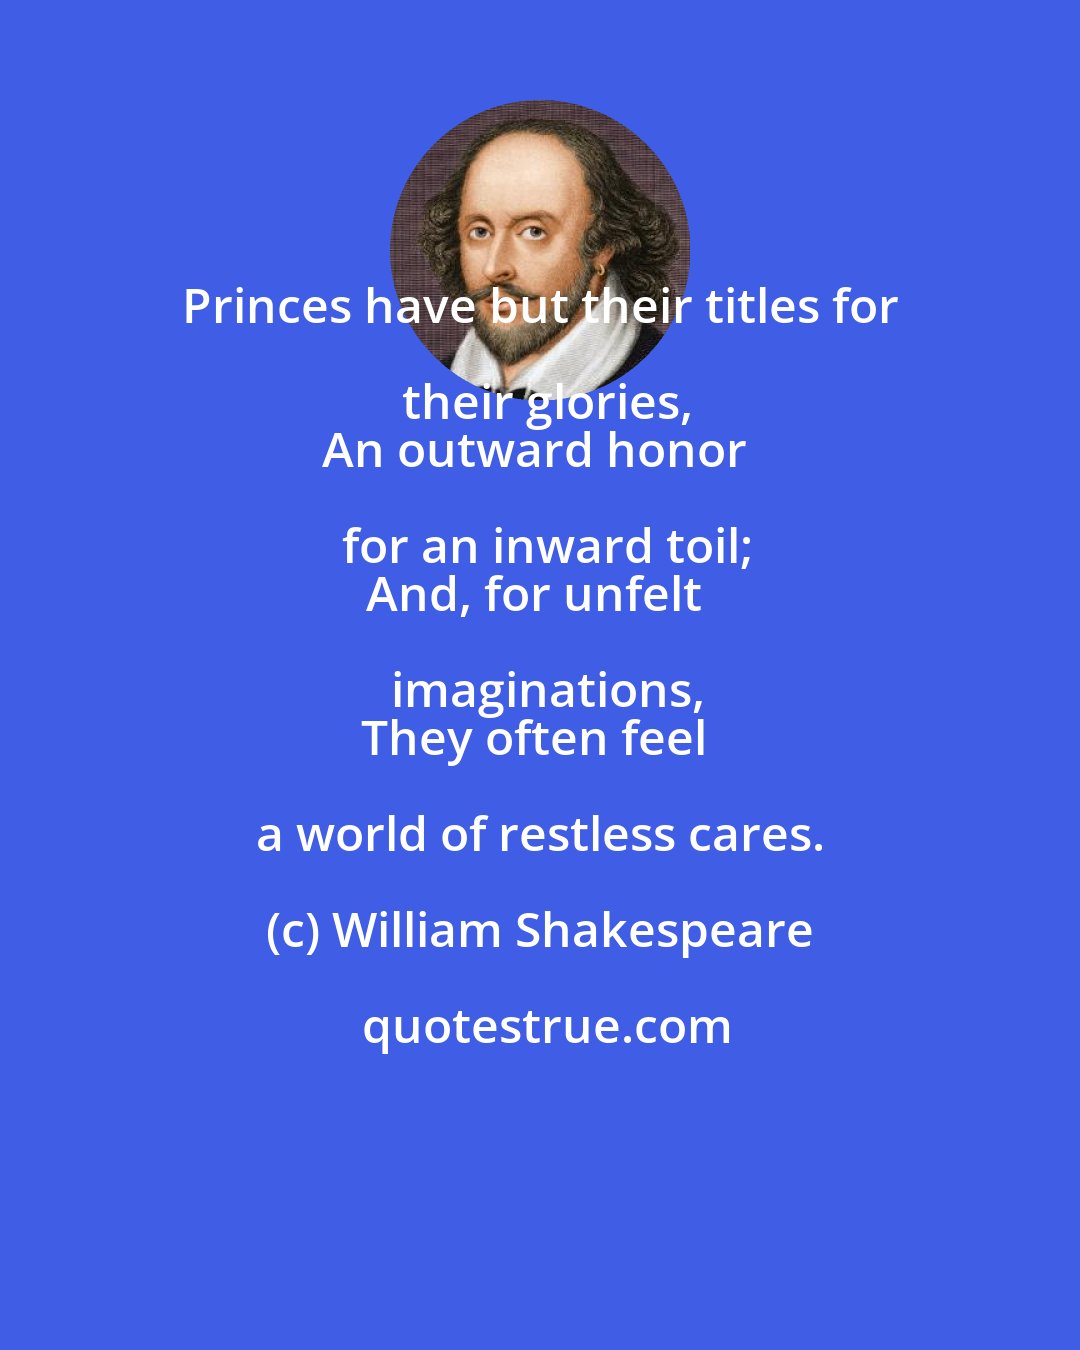 William Shakespeare: Princes have but their titles for their glories,
An outward honor for an inward toil;
And, for unfelt imaginations,
They often feel a world of restless cares.